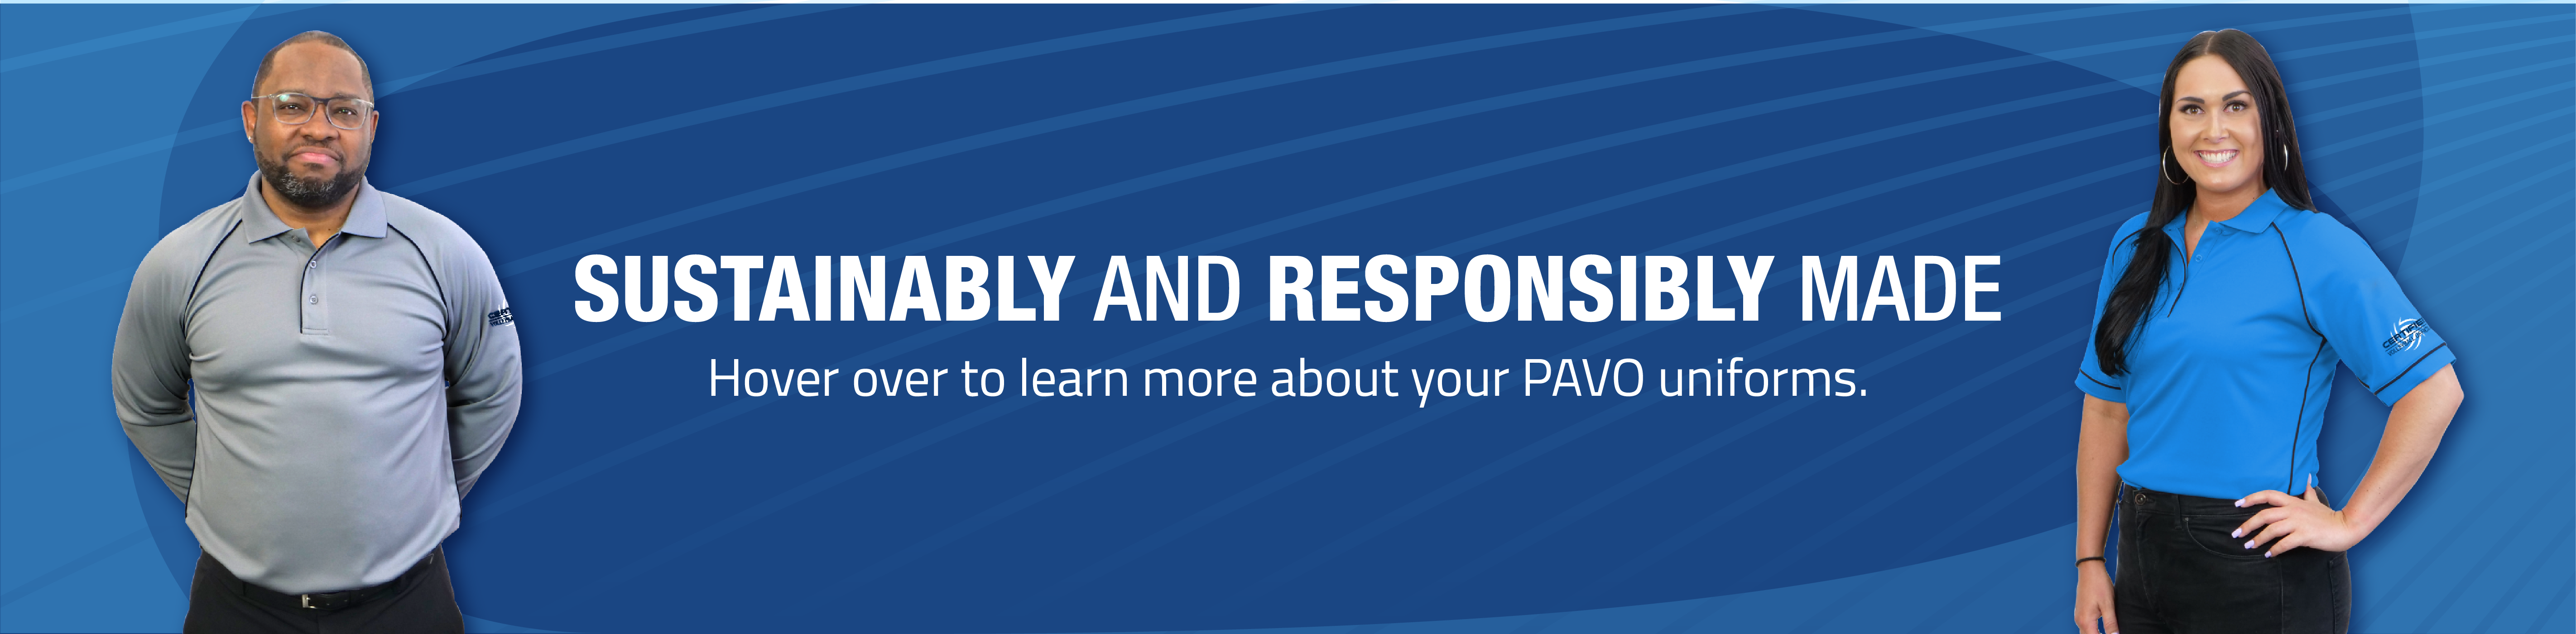 PAVO-Sustainability Banner-202306-02.png